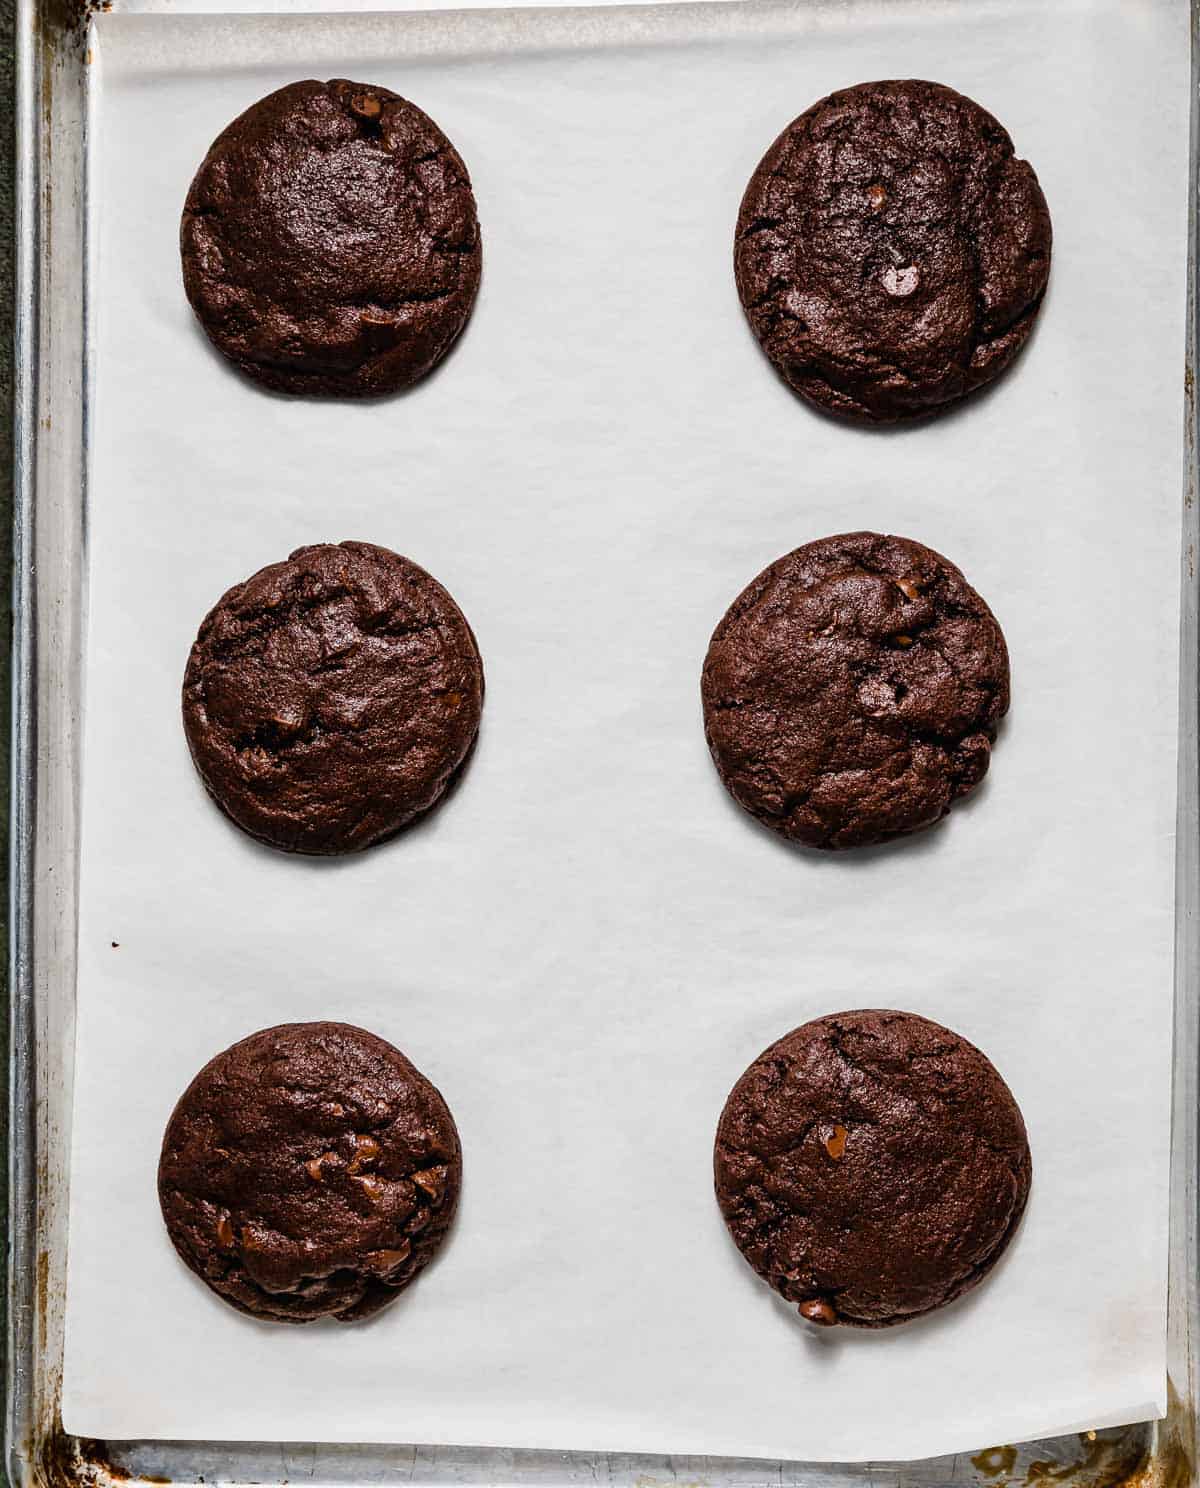 Six baked chocolate Peppermint Bark Cookies on a white parchment paper.